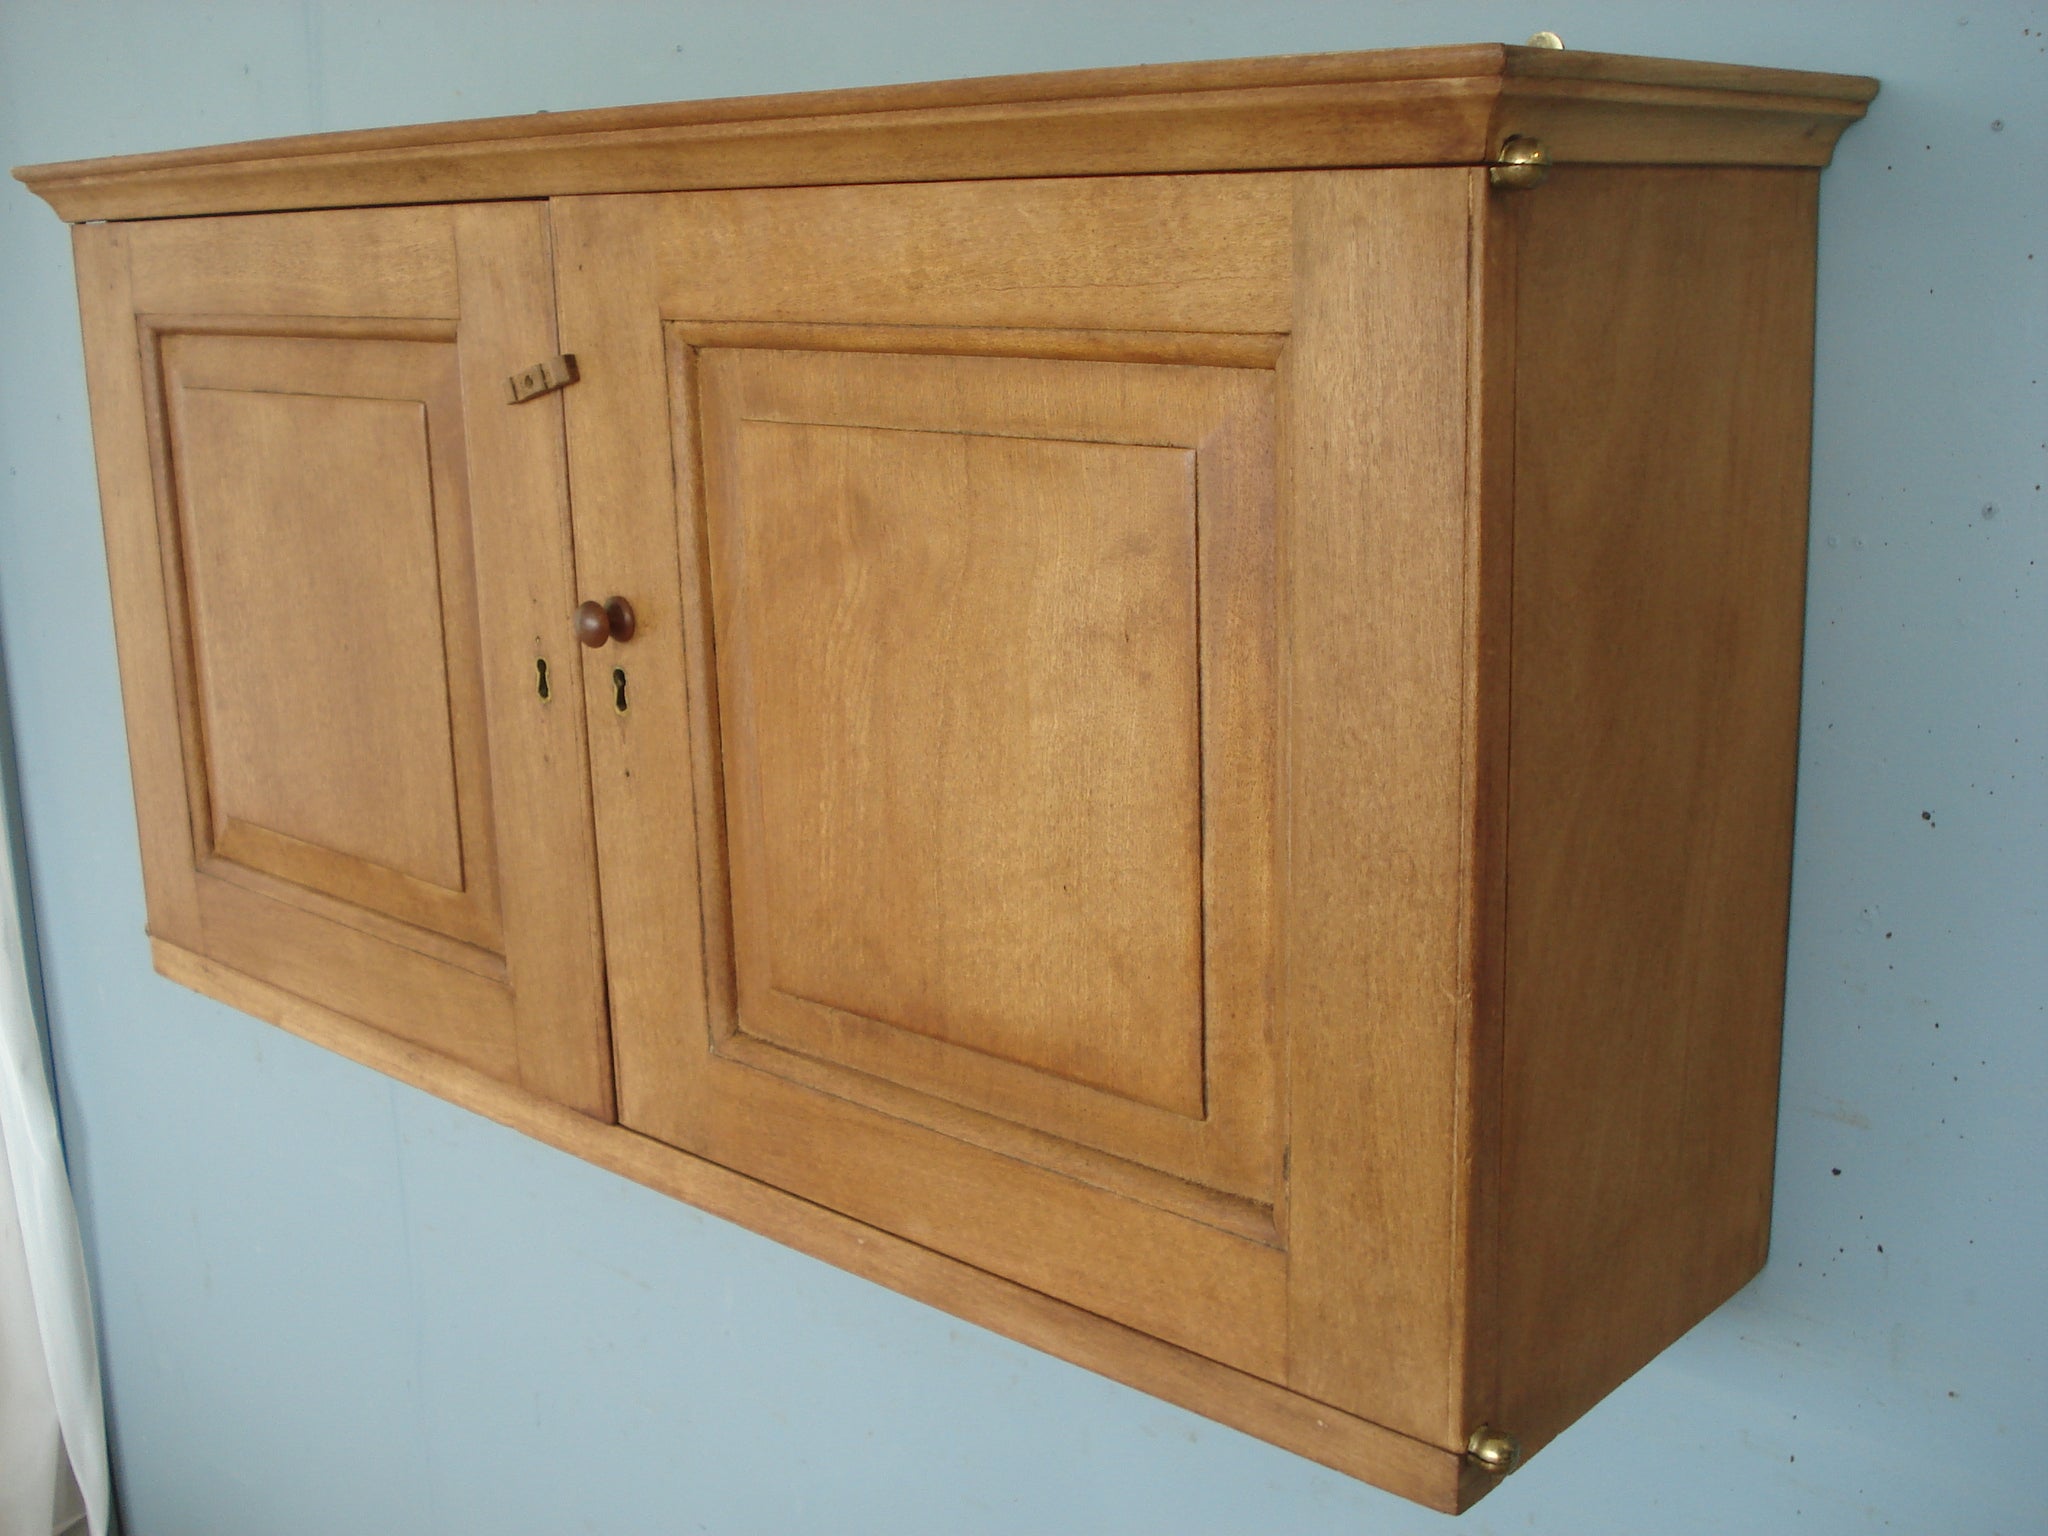 Wall cabinet in blonde mahogany with specimen drawers and slide out shelves. Circa 1860